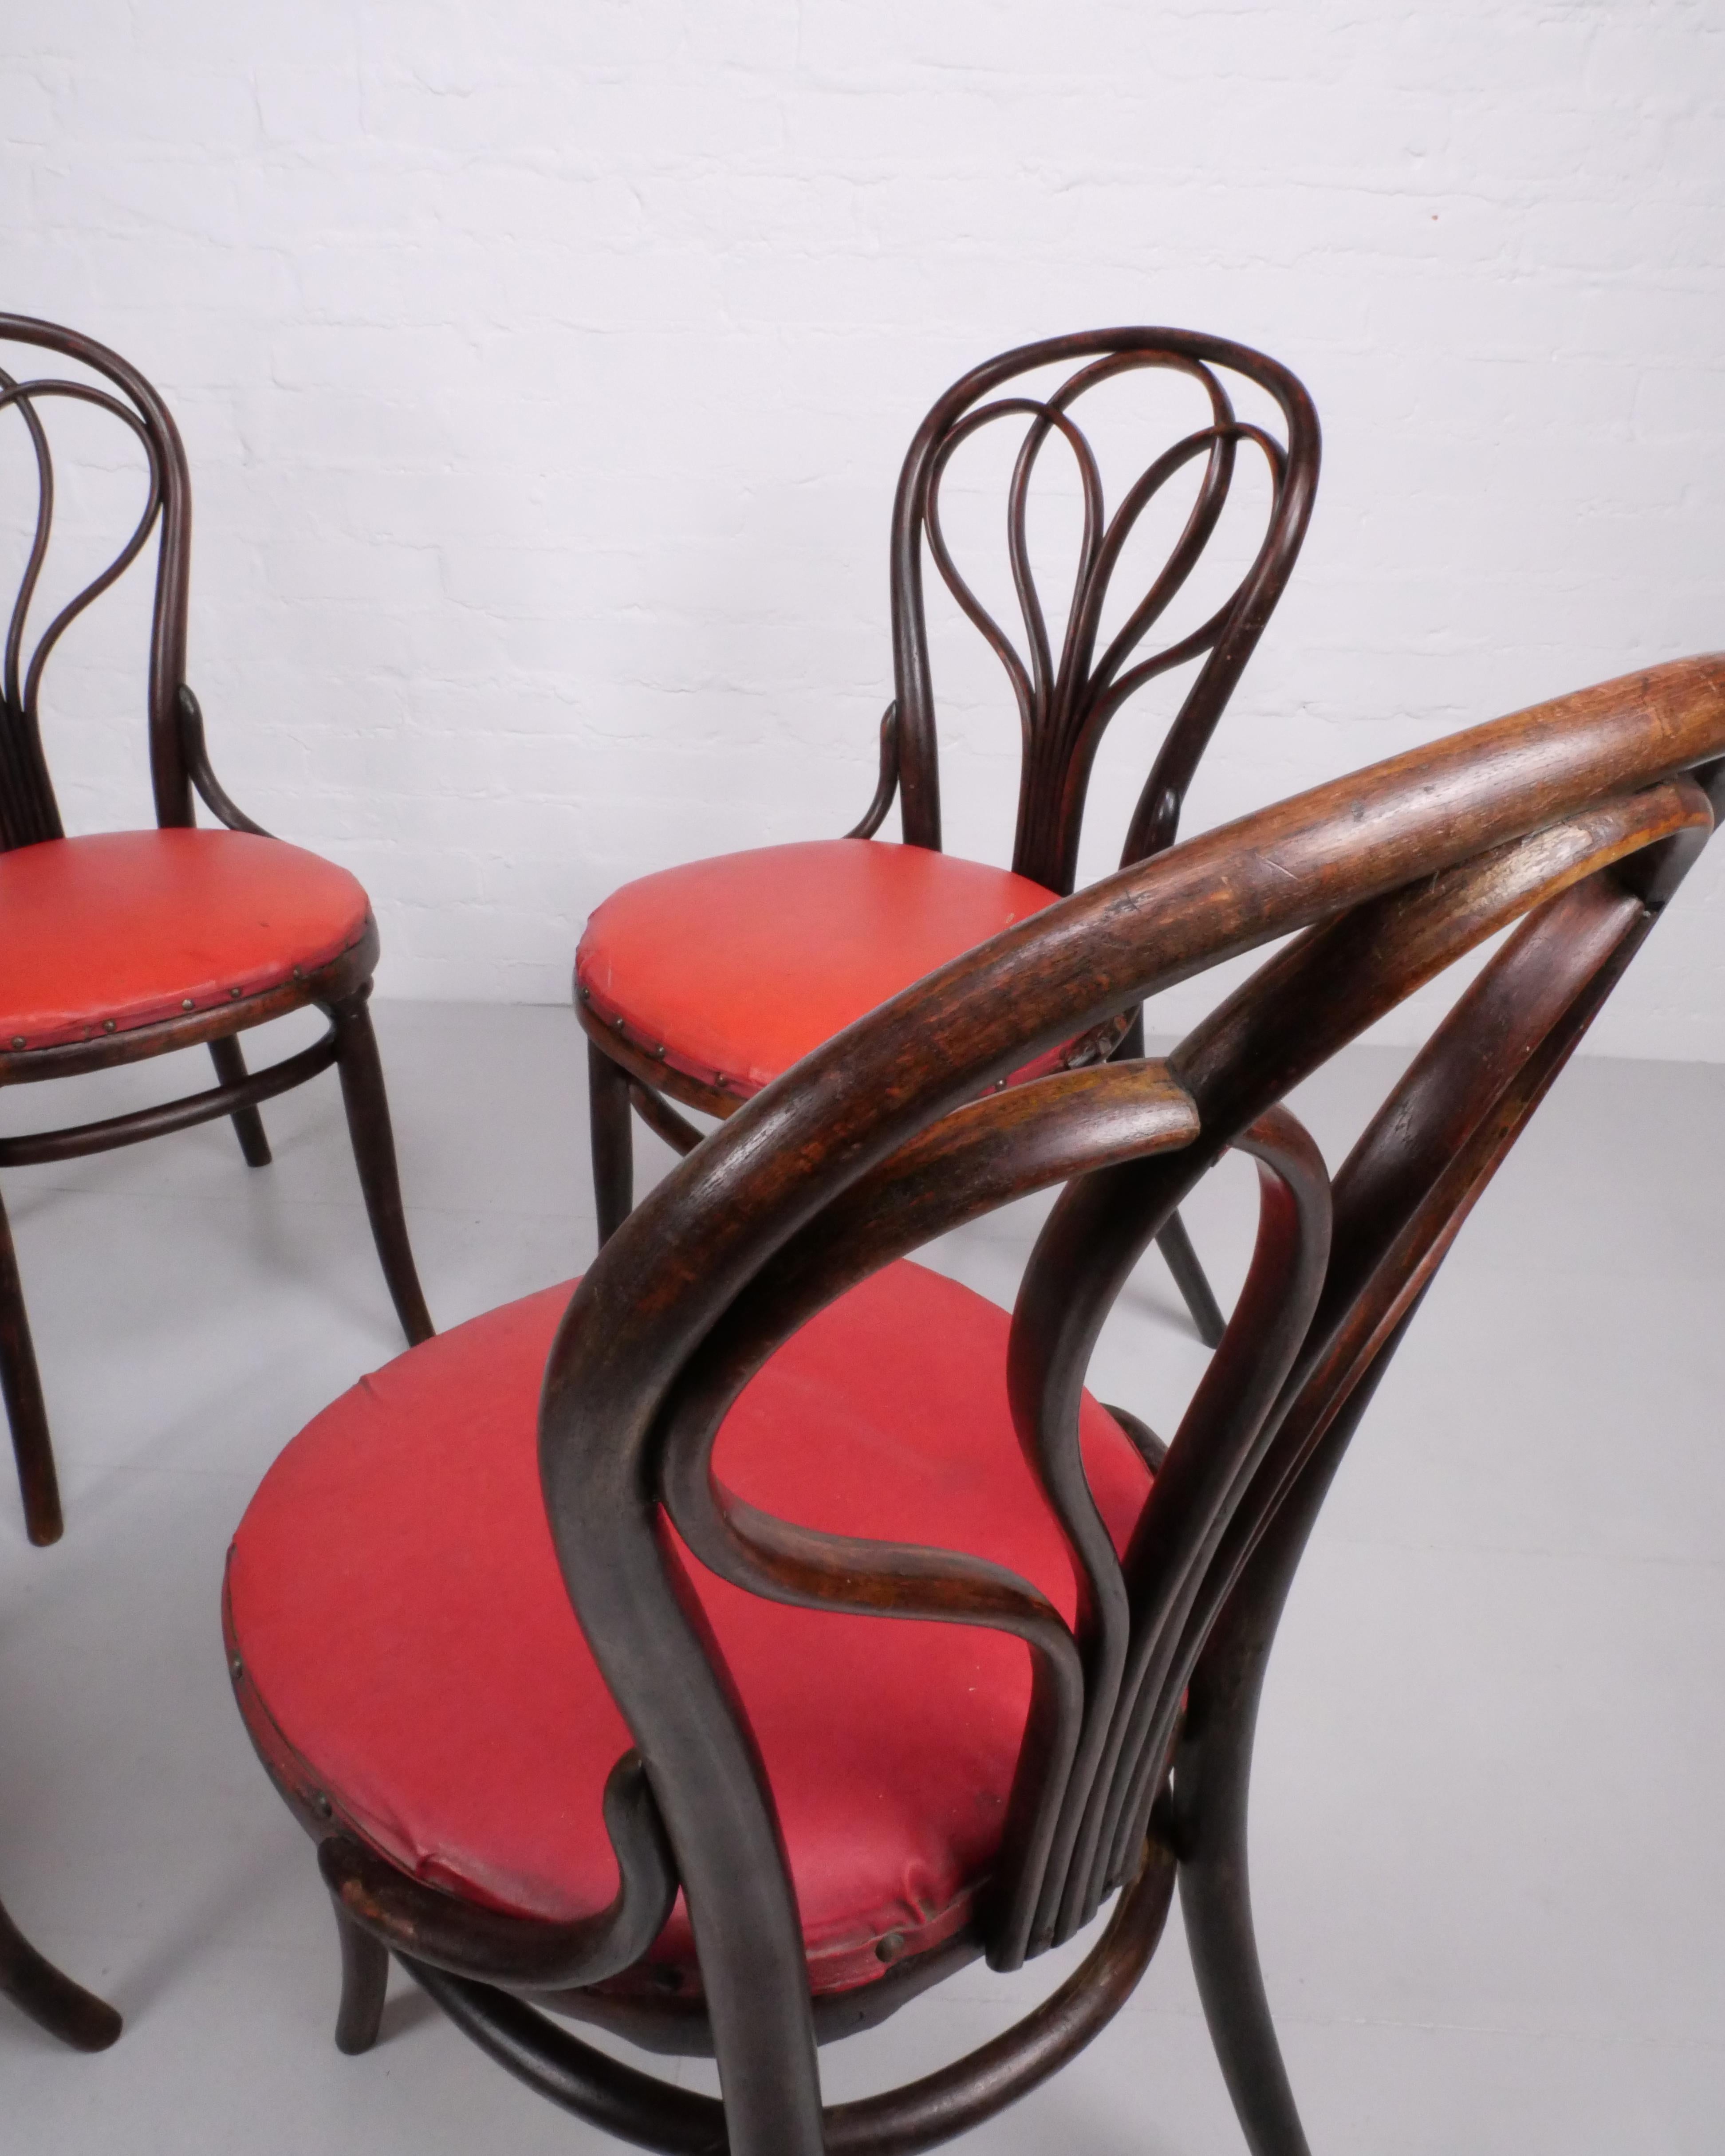 Set of 4 no.25 dining chairs by Gebrüder Thonet, c. 1870 For Sale 3